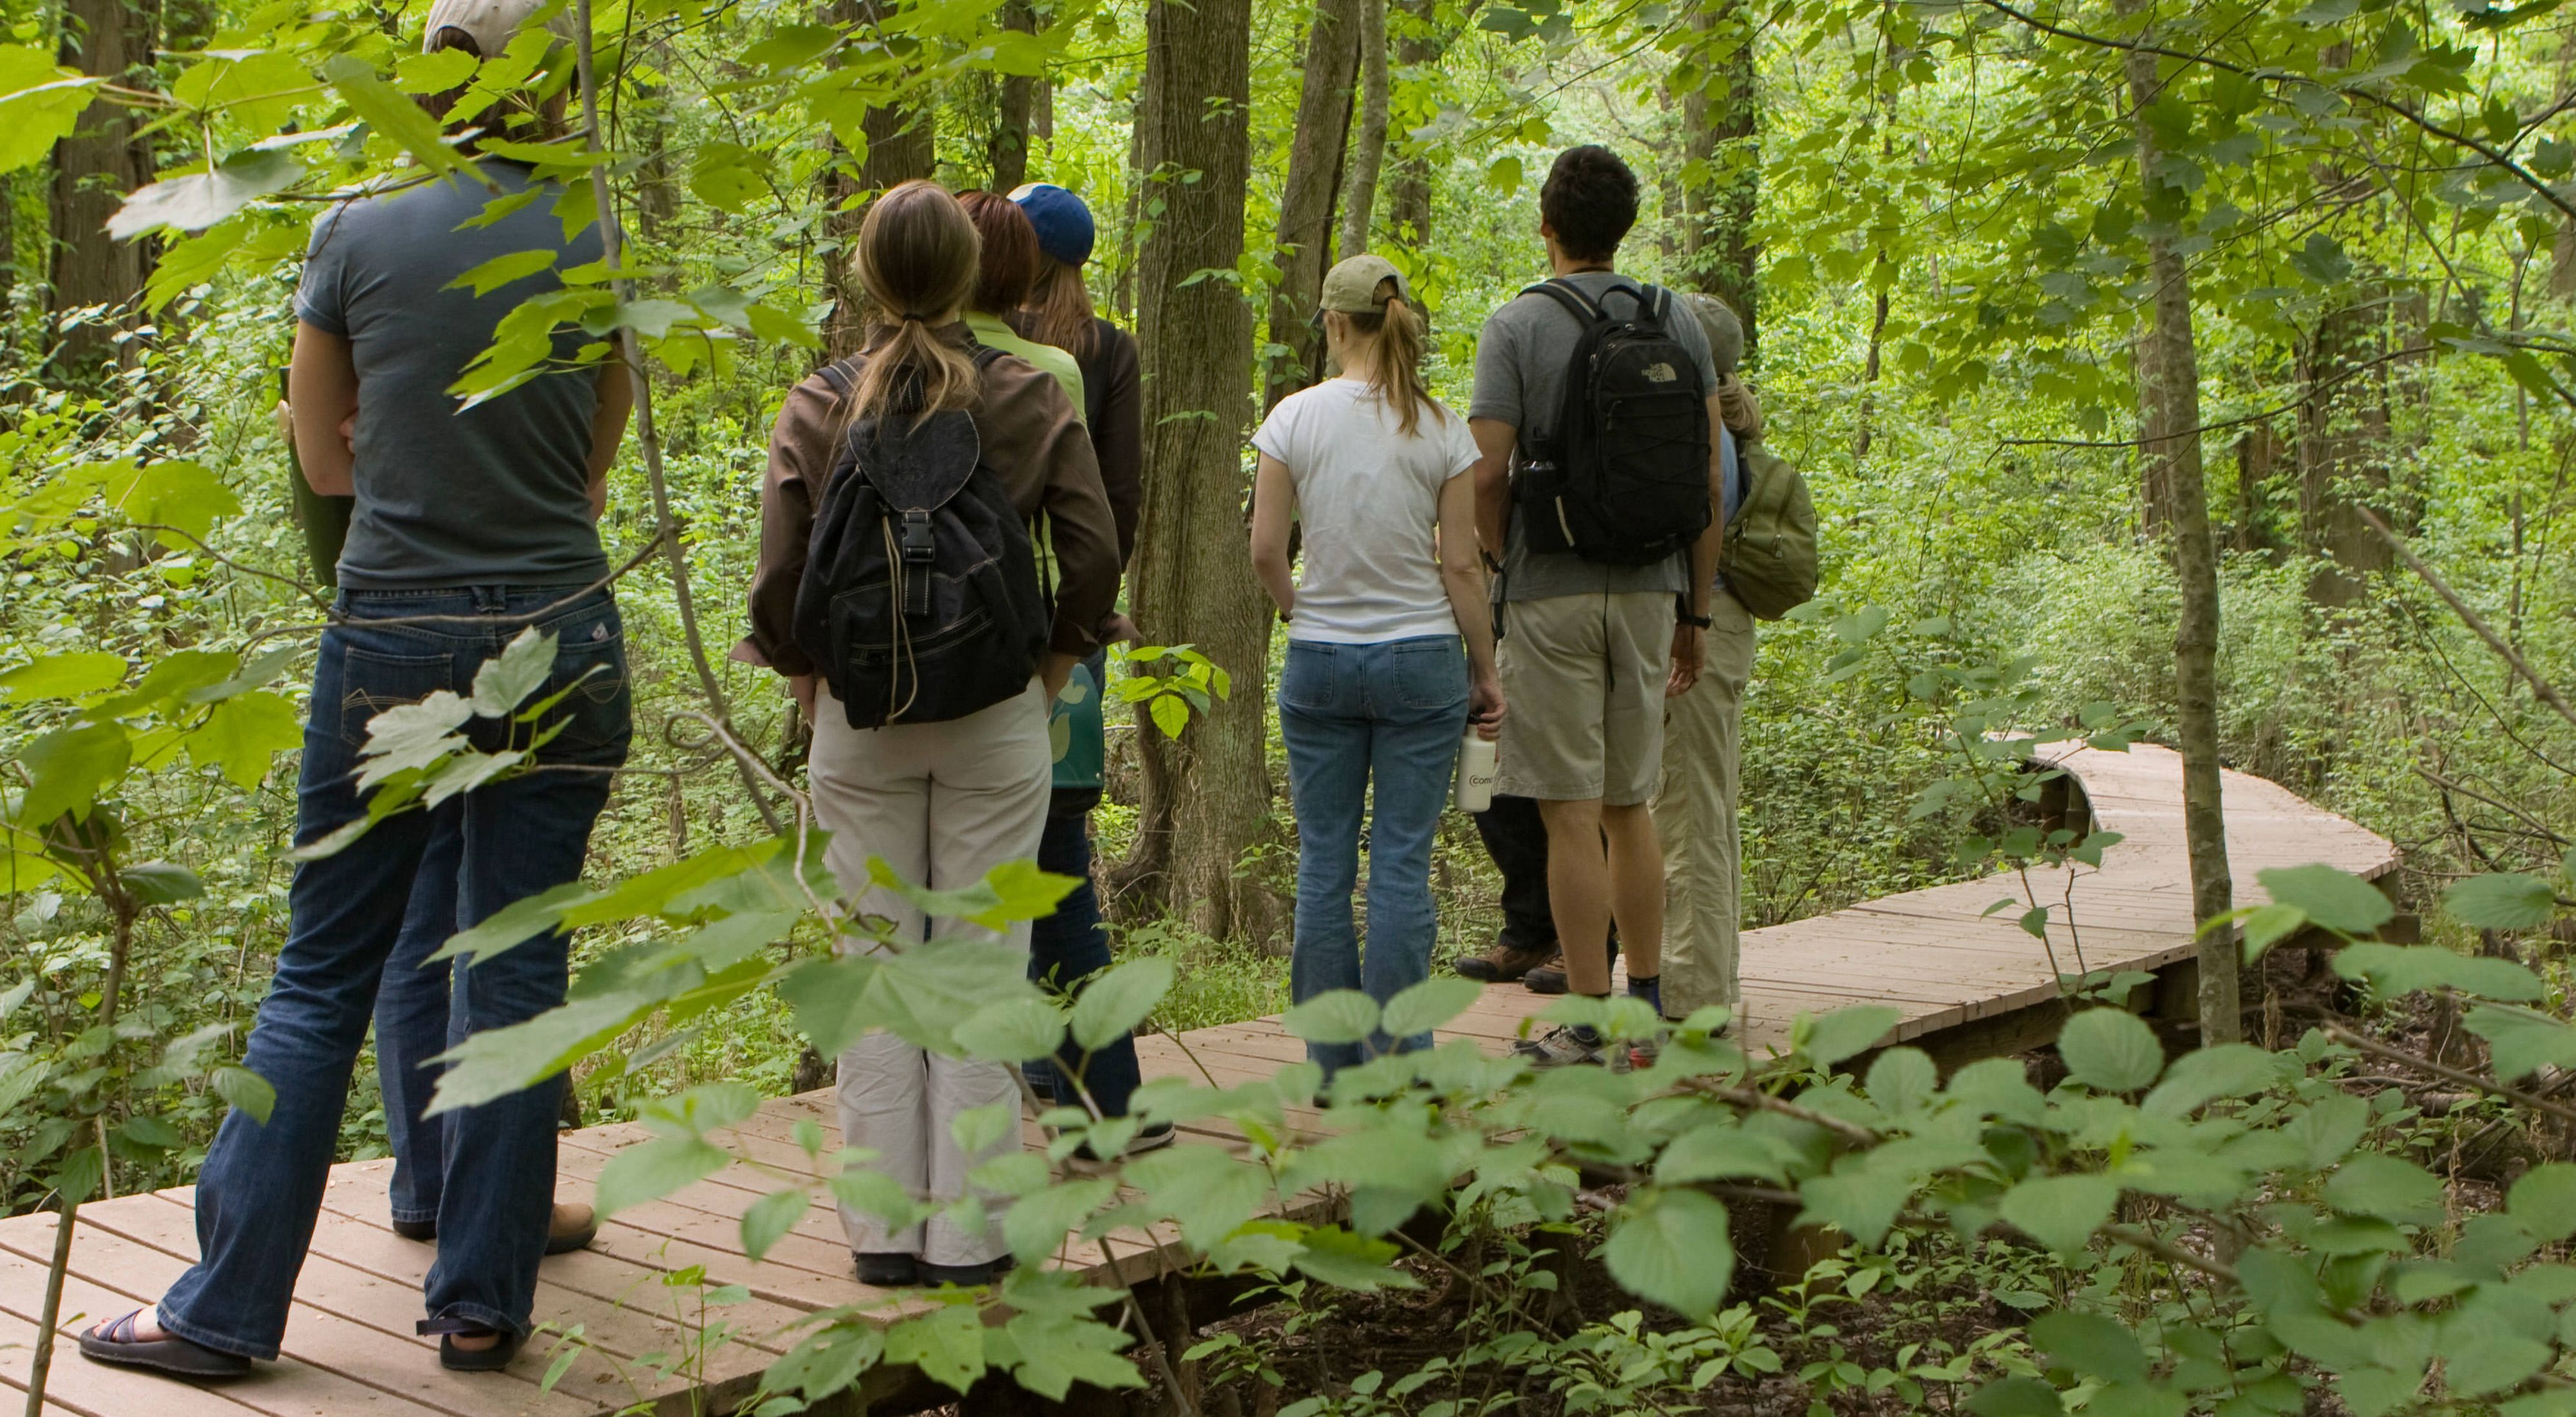 A group of six people stand together on a boardwalk in the middle of a forest. They are all facing away from the camera, looking into the trees. The wooden boardwalk curves ahead and disappears.